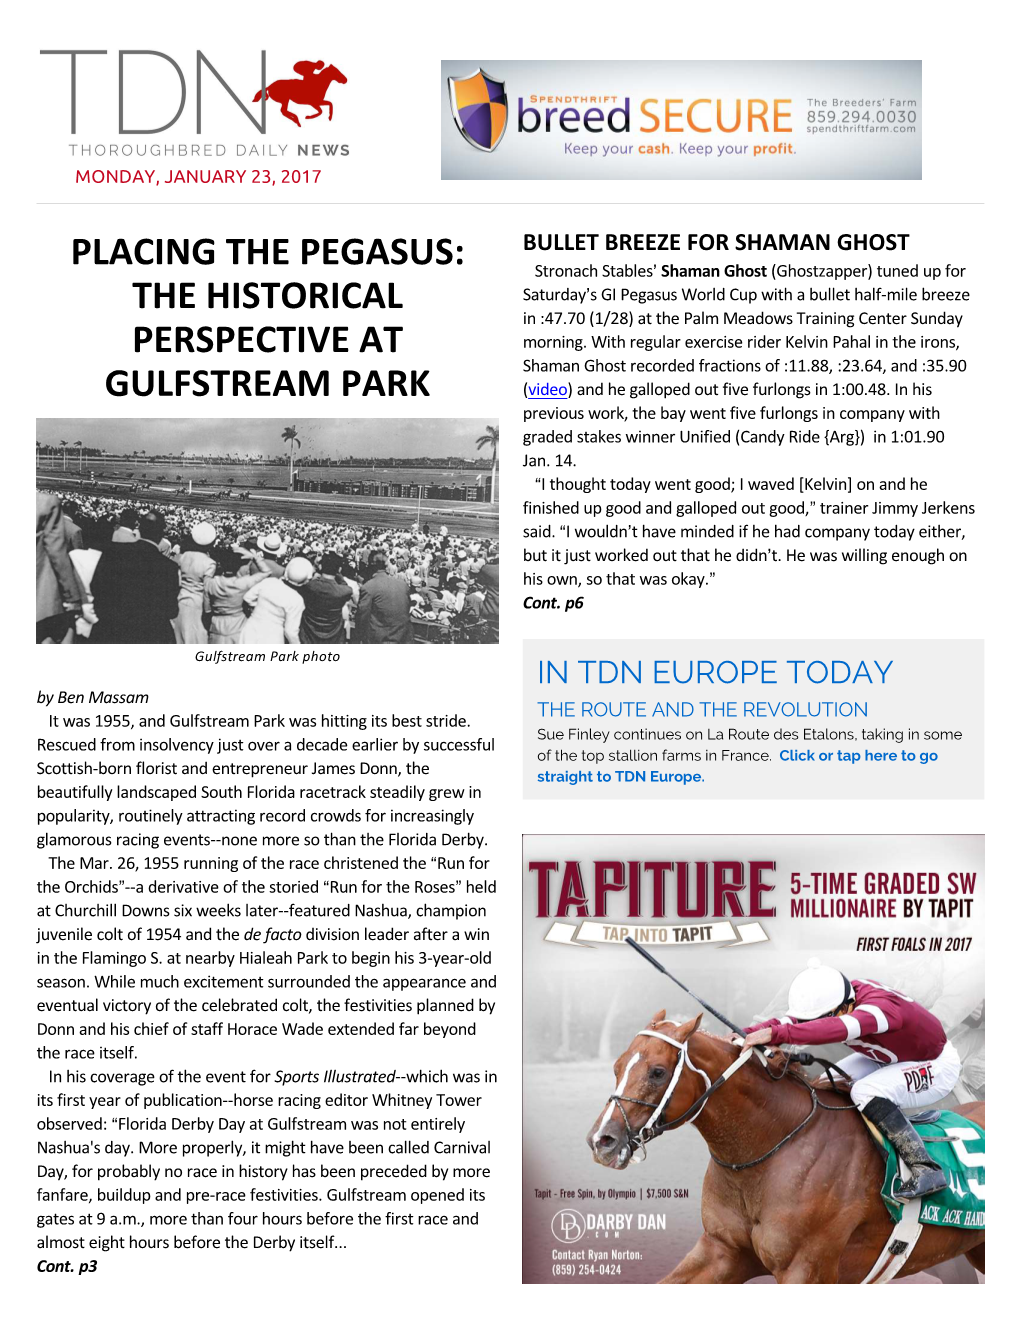 Placing the Pegasus: the Historical Perspective at Gulfstream Park